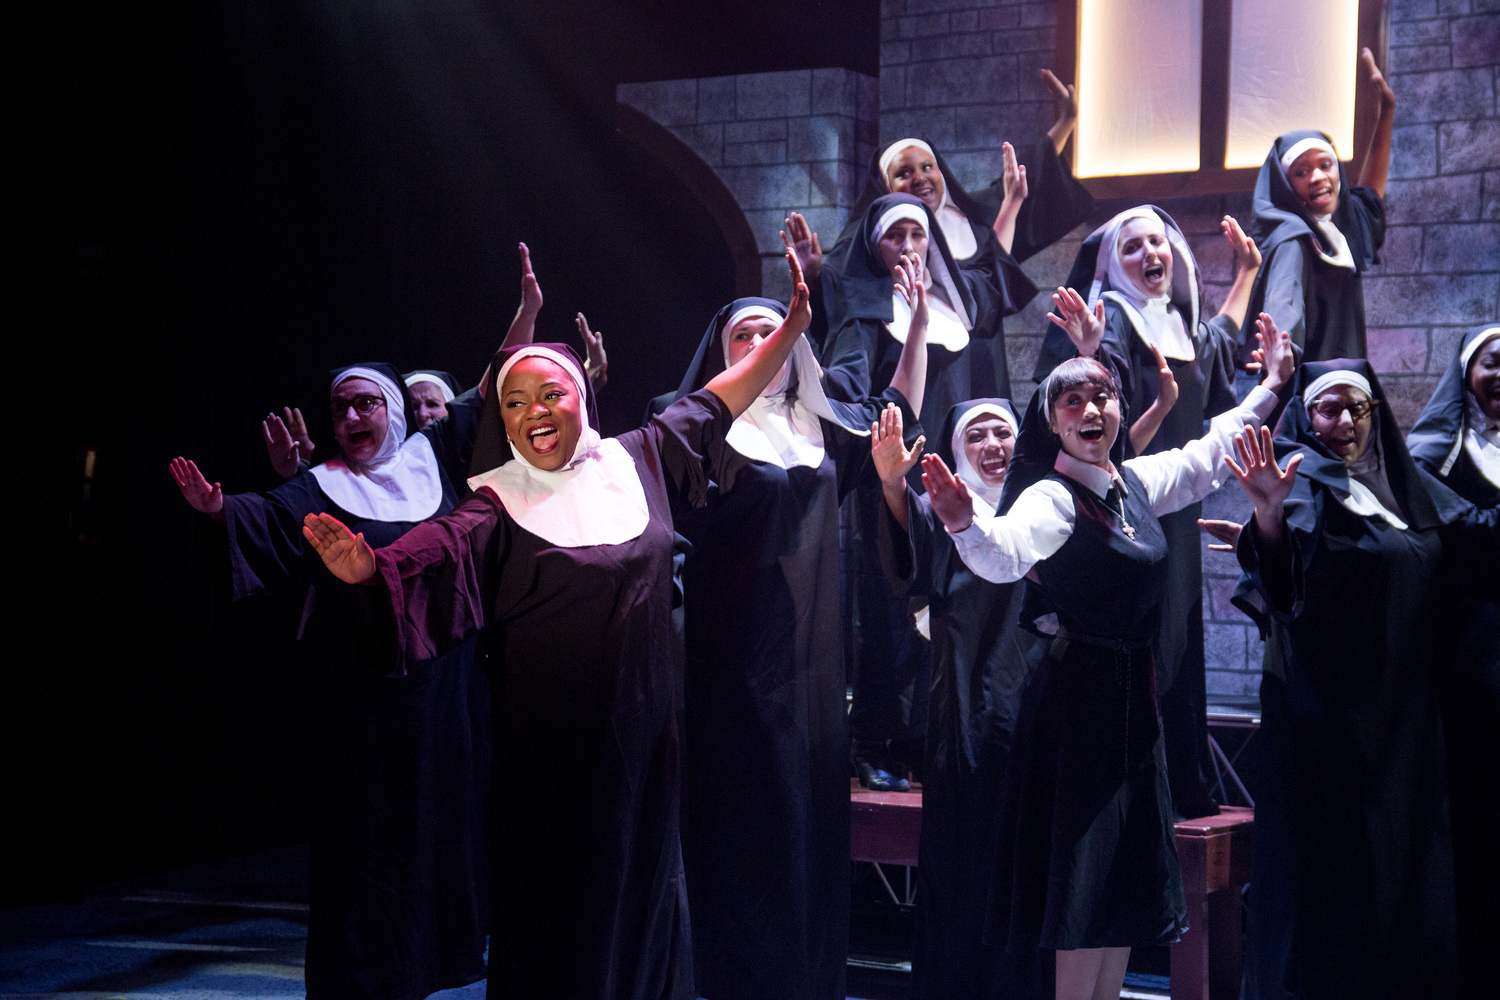 Sister Mary Clarence (Elizabeth Adabale - left) and company in SISTER ACT THE MUSICAL at the Simi Valley Cultural Arts Center through February 18. For ticket information: www.simi-arts.org or (805) 583-7900.